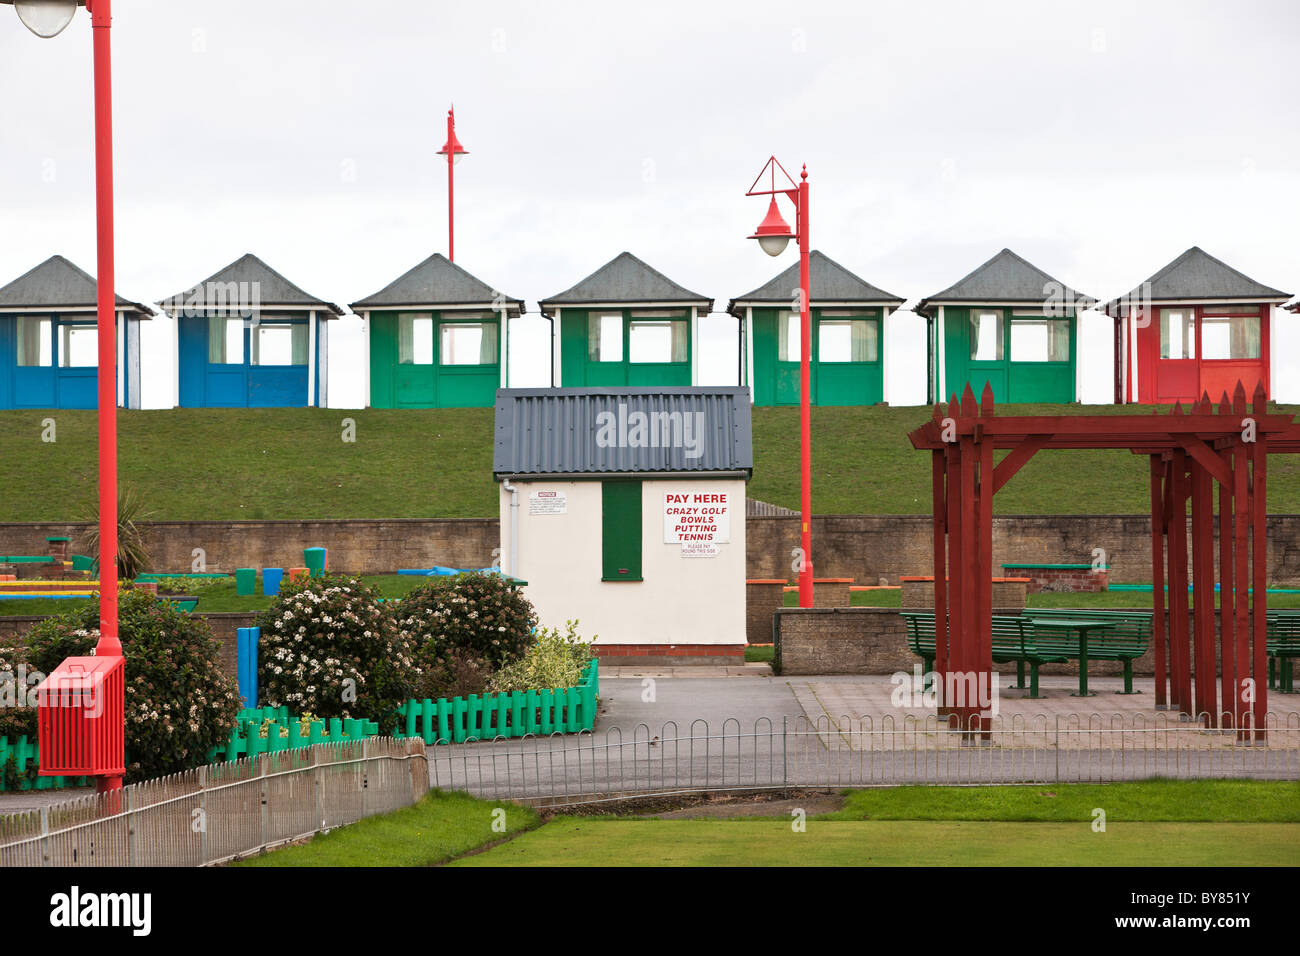 Beach Huts in Mablethorpe Lincolnshire UK Stock Photo